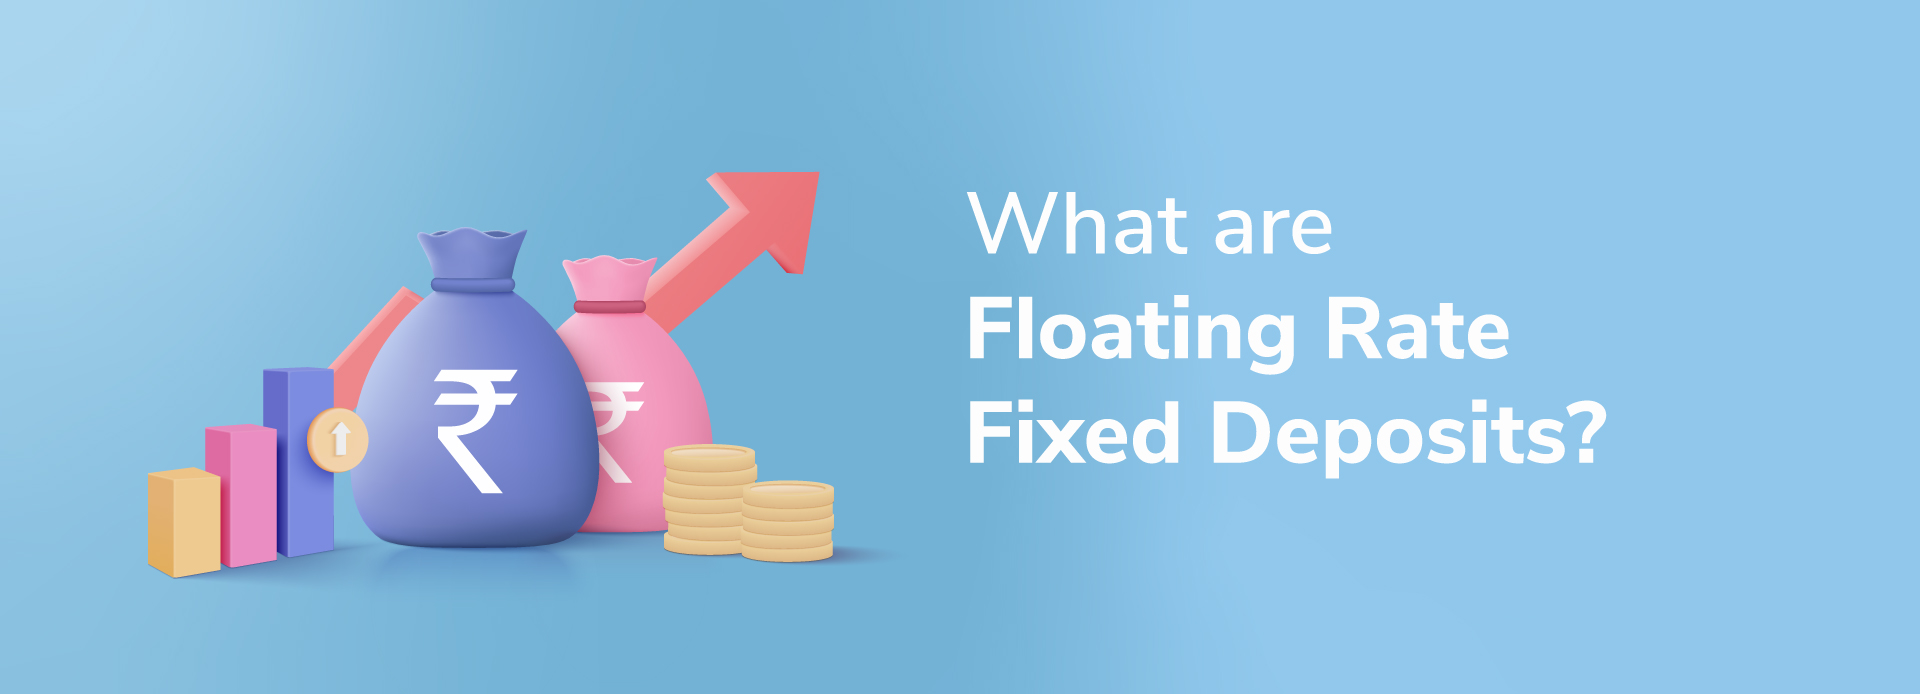 What are floating-rate Fixed Deposits? 